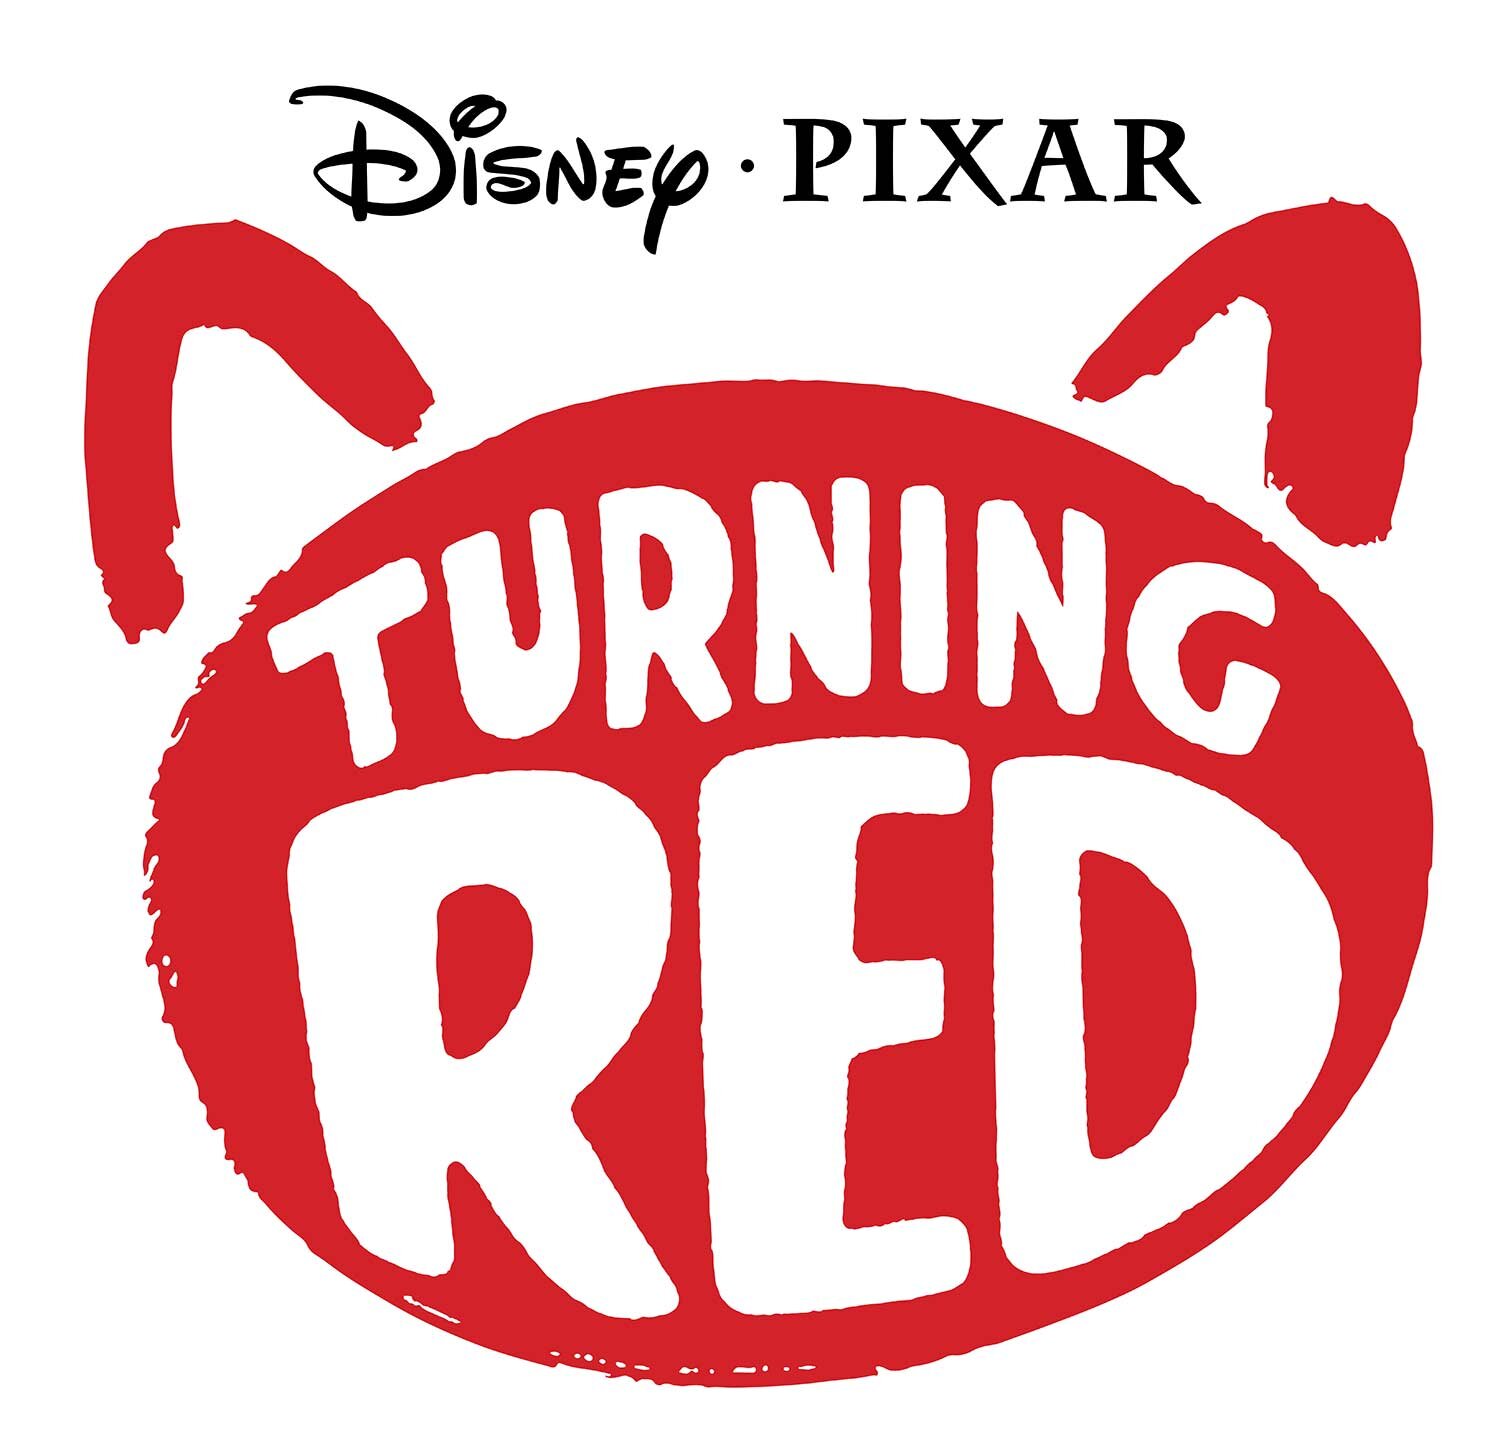 TURNING RED All Movie Clips (2022) Pixar 